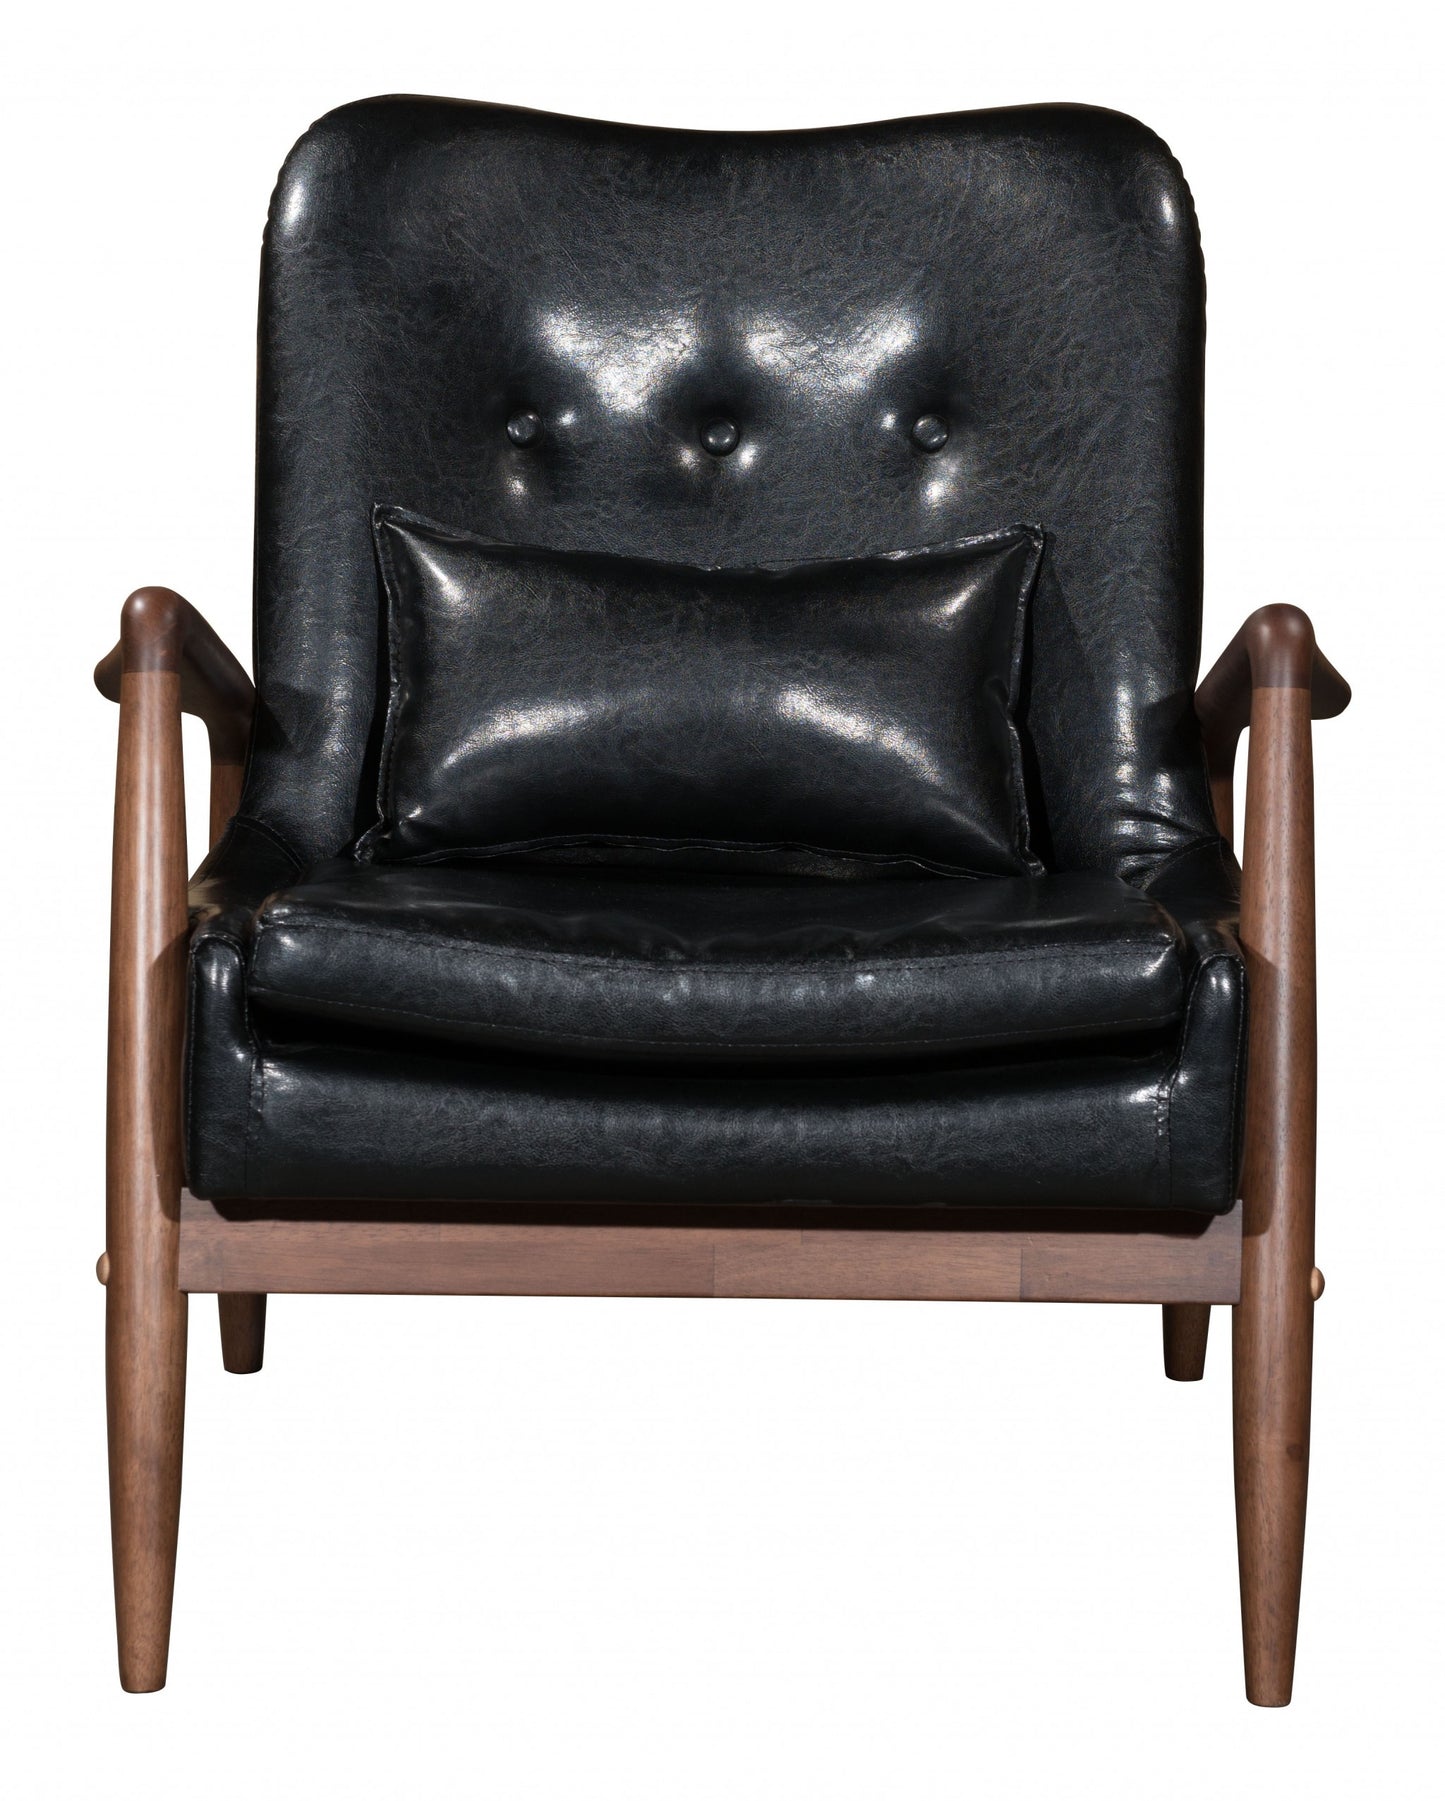 30" Black and Brown Faux Leather Tufted Arm Chair with Ottoman By Homeroots